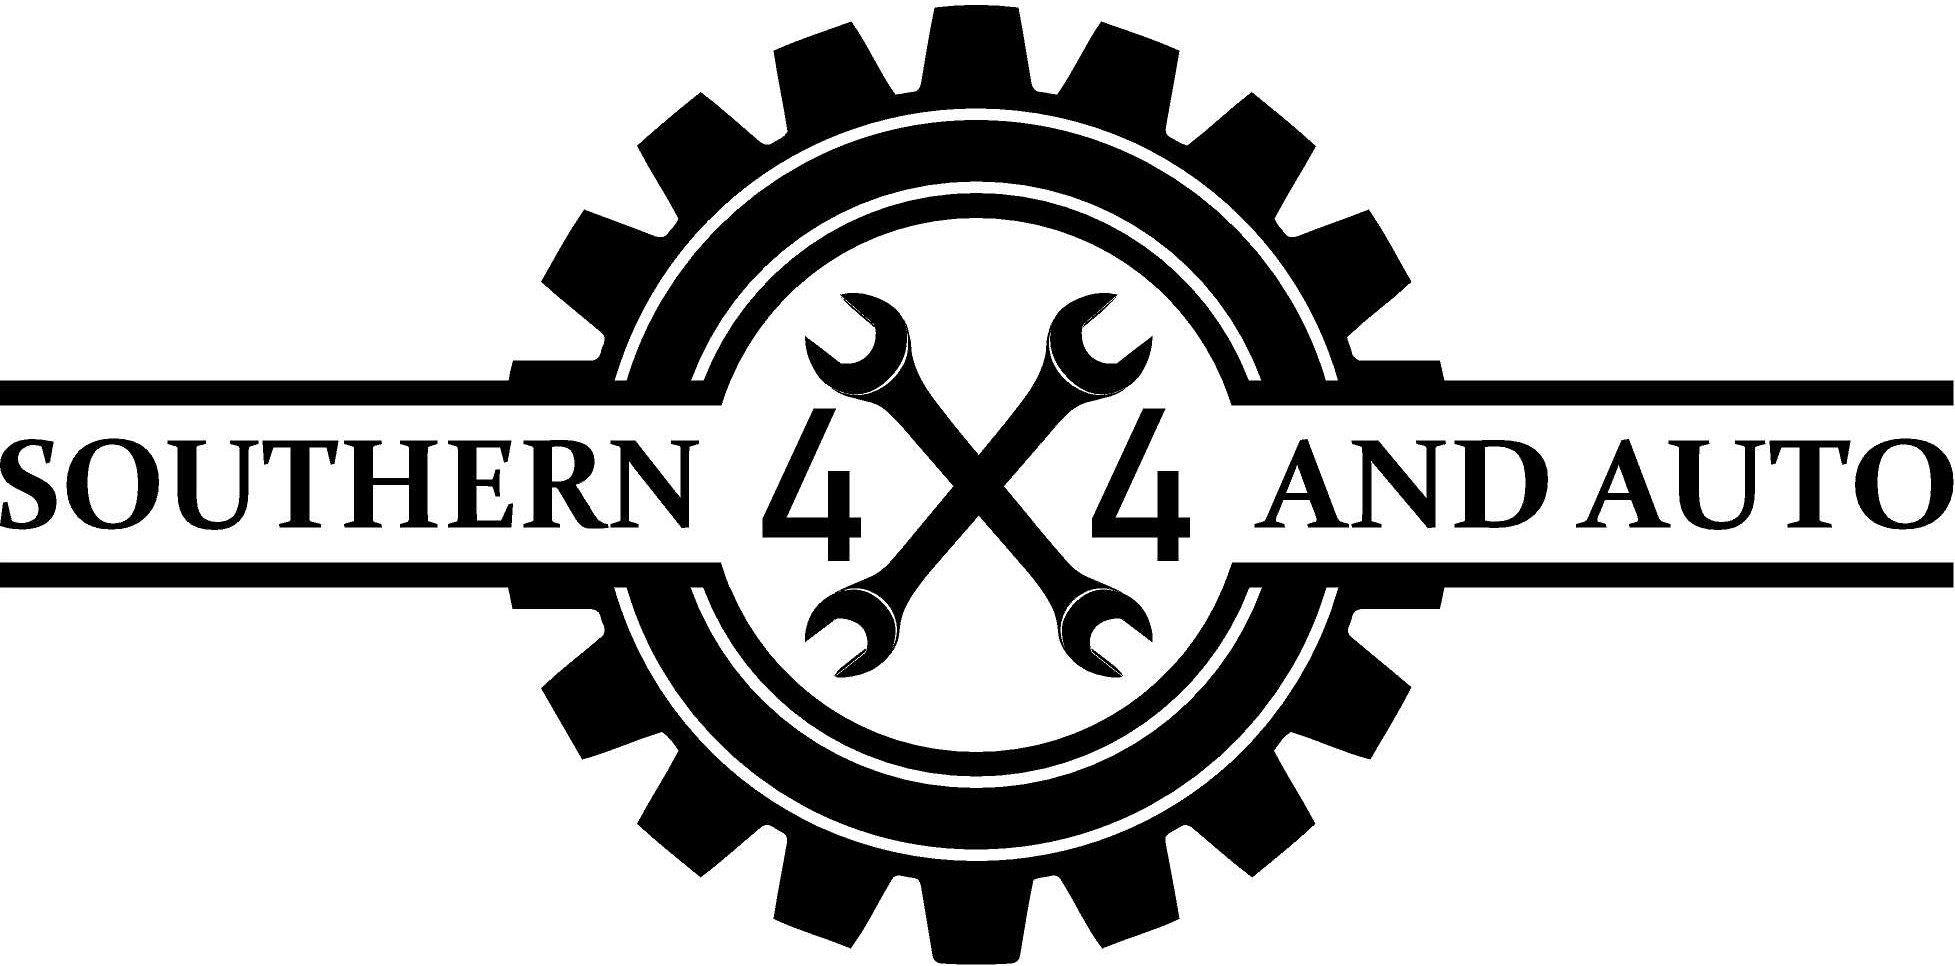 Southern 4x4 and Auto LLC